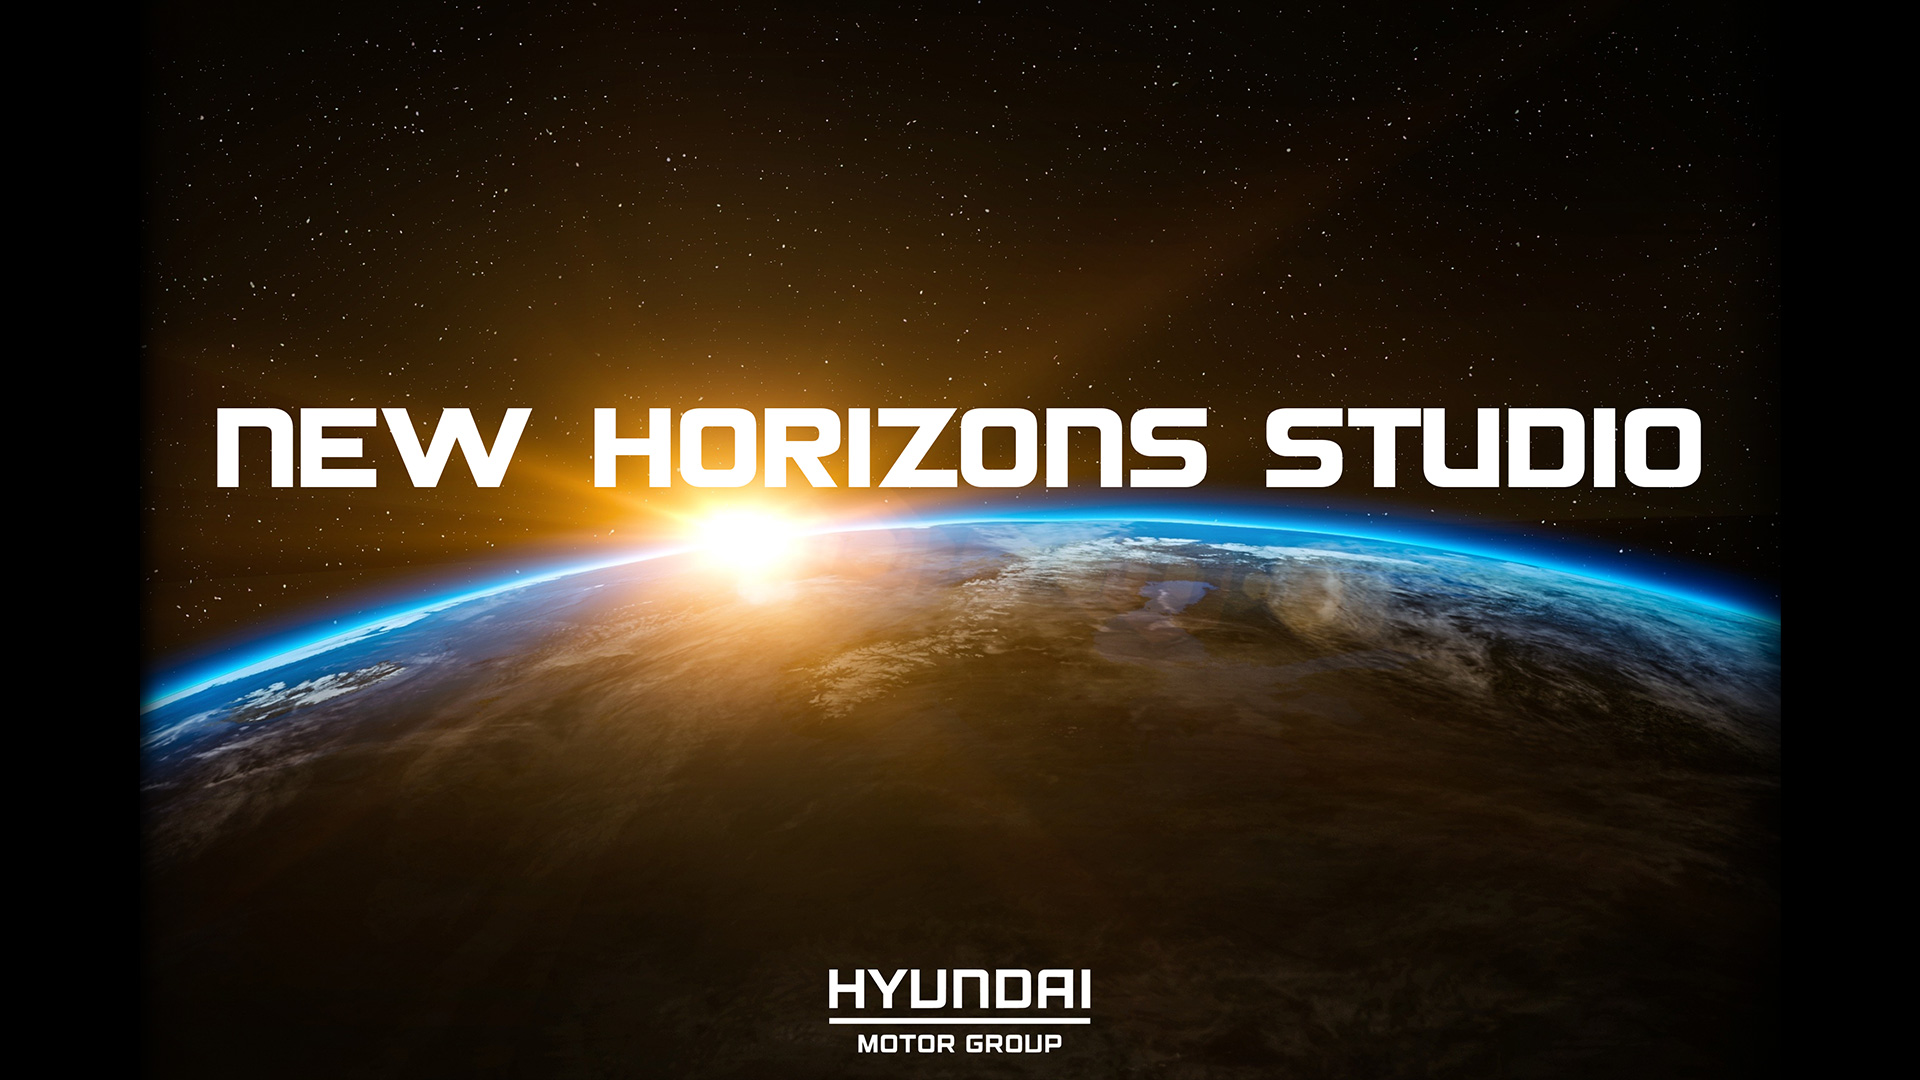 Hyundai Motor Group Announces New Horizons Studio to Develop Ultimate Mobility Vehicles